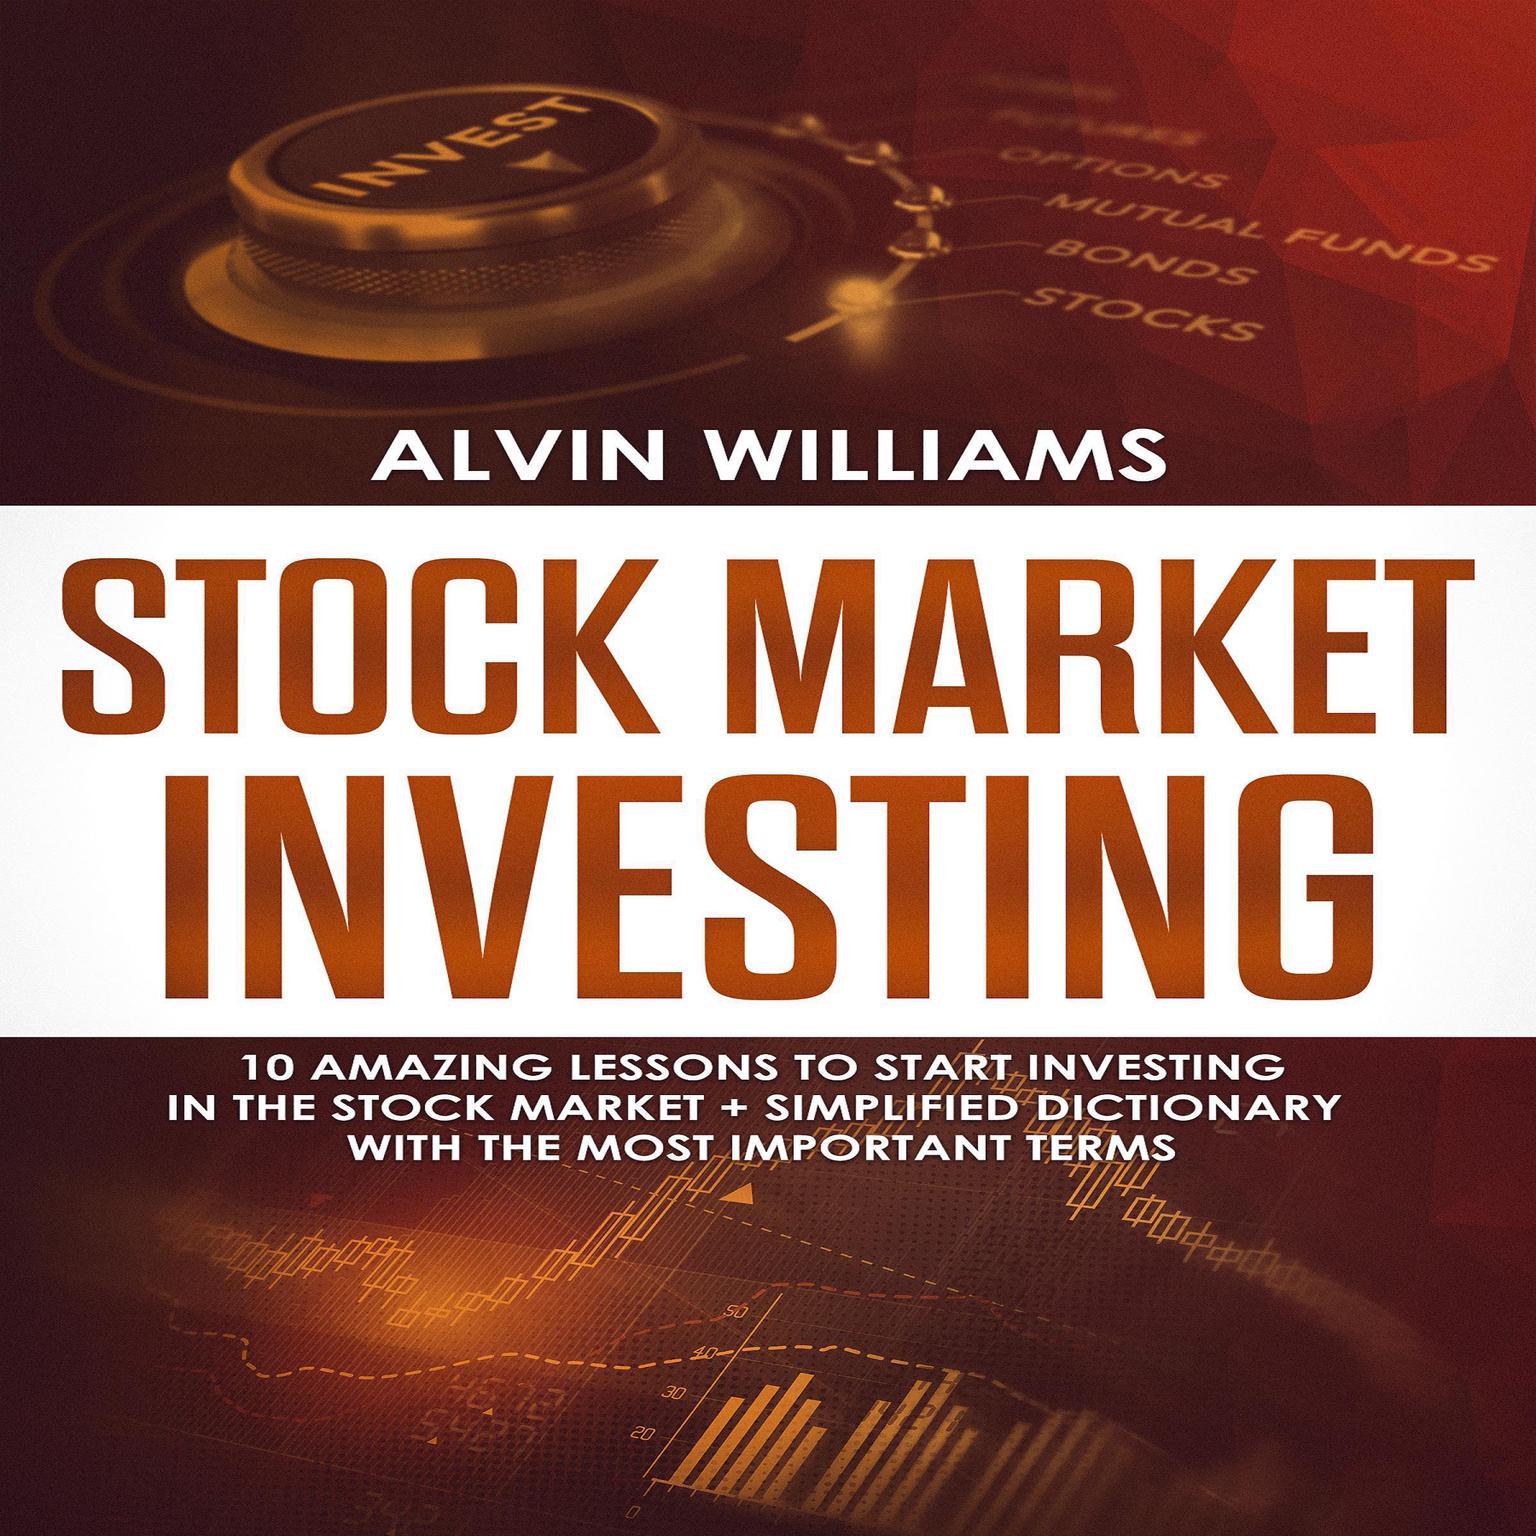 Stock Market Investing: 10 Amazing Lessons to start Investing in the Stock Market + Simplified Dictionary with the Most Important Terms (Abridged) Audiobook, by Alvin Williams